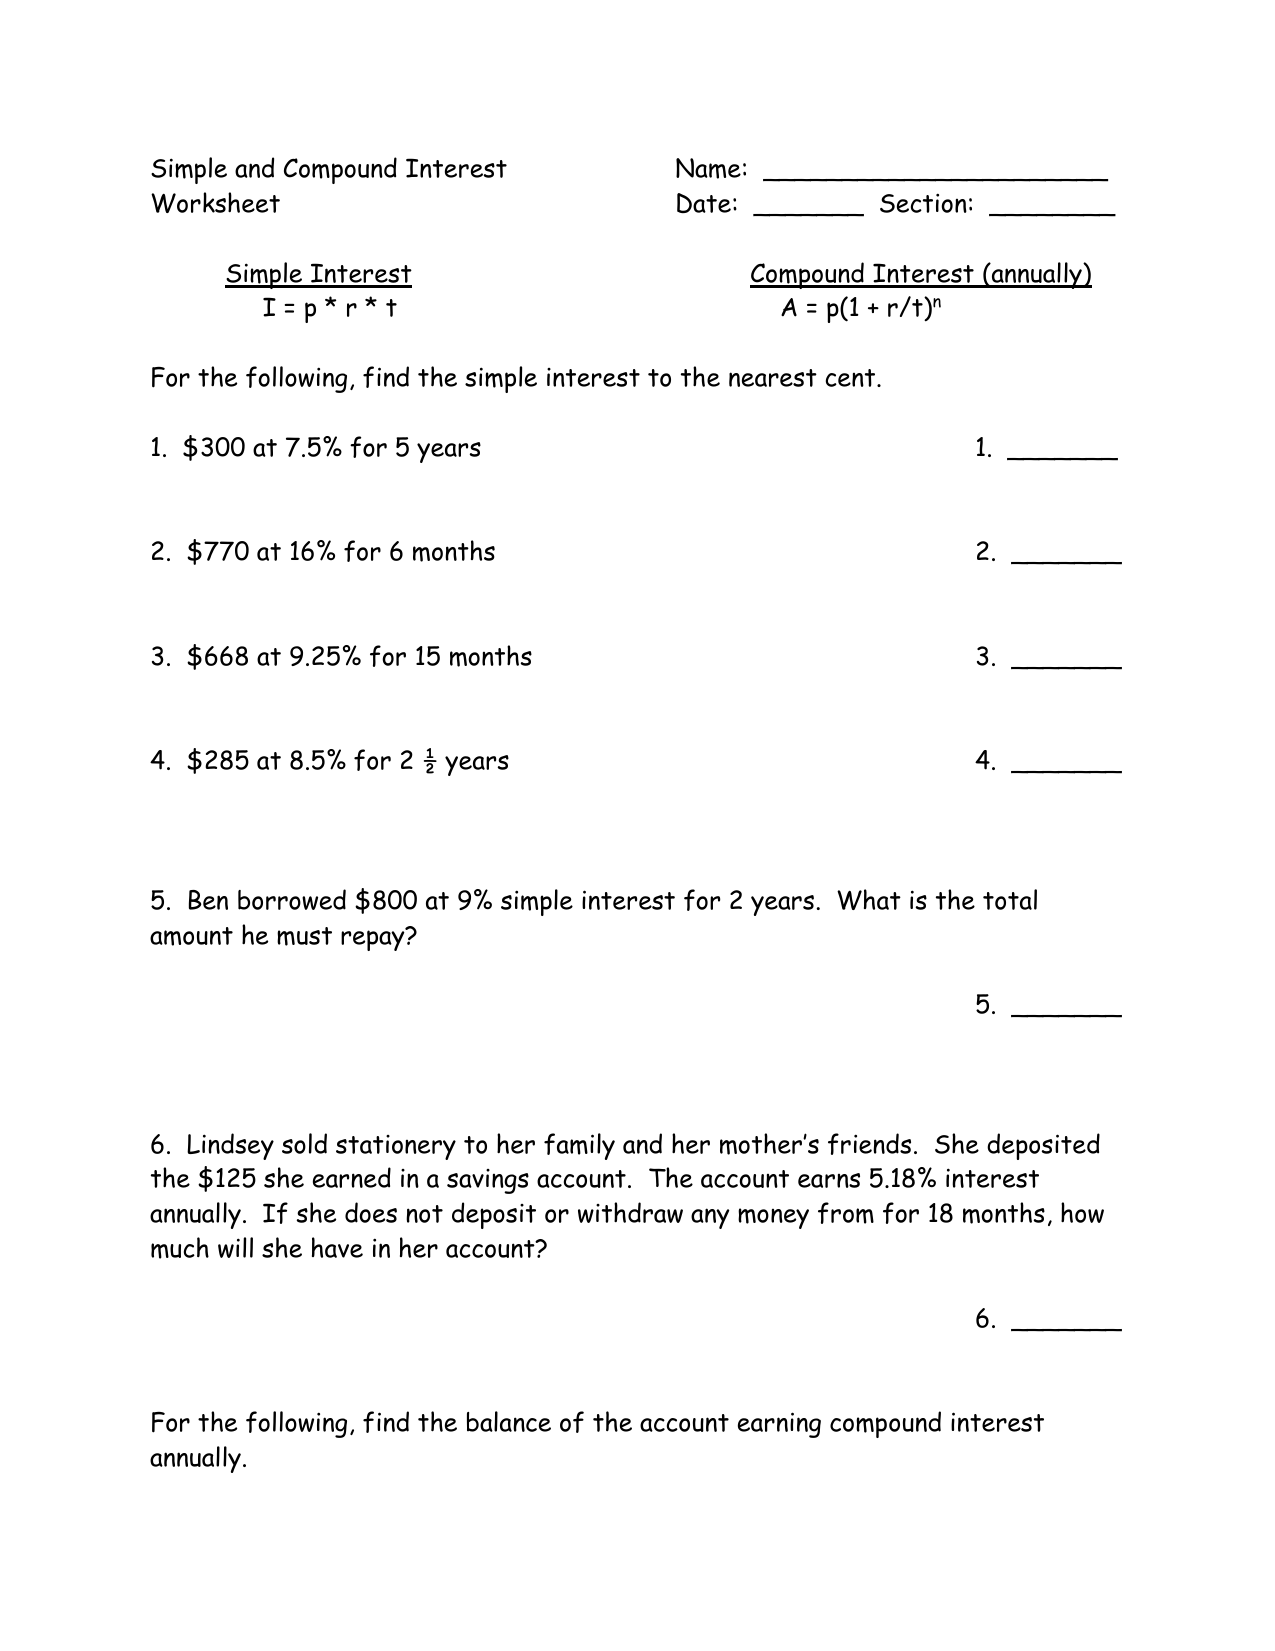 Simple and Compound Interest Worksheet For Simple And Compound Interest Worksheet